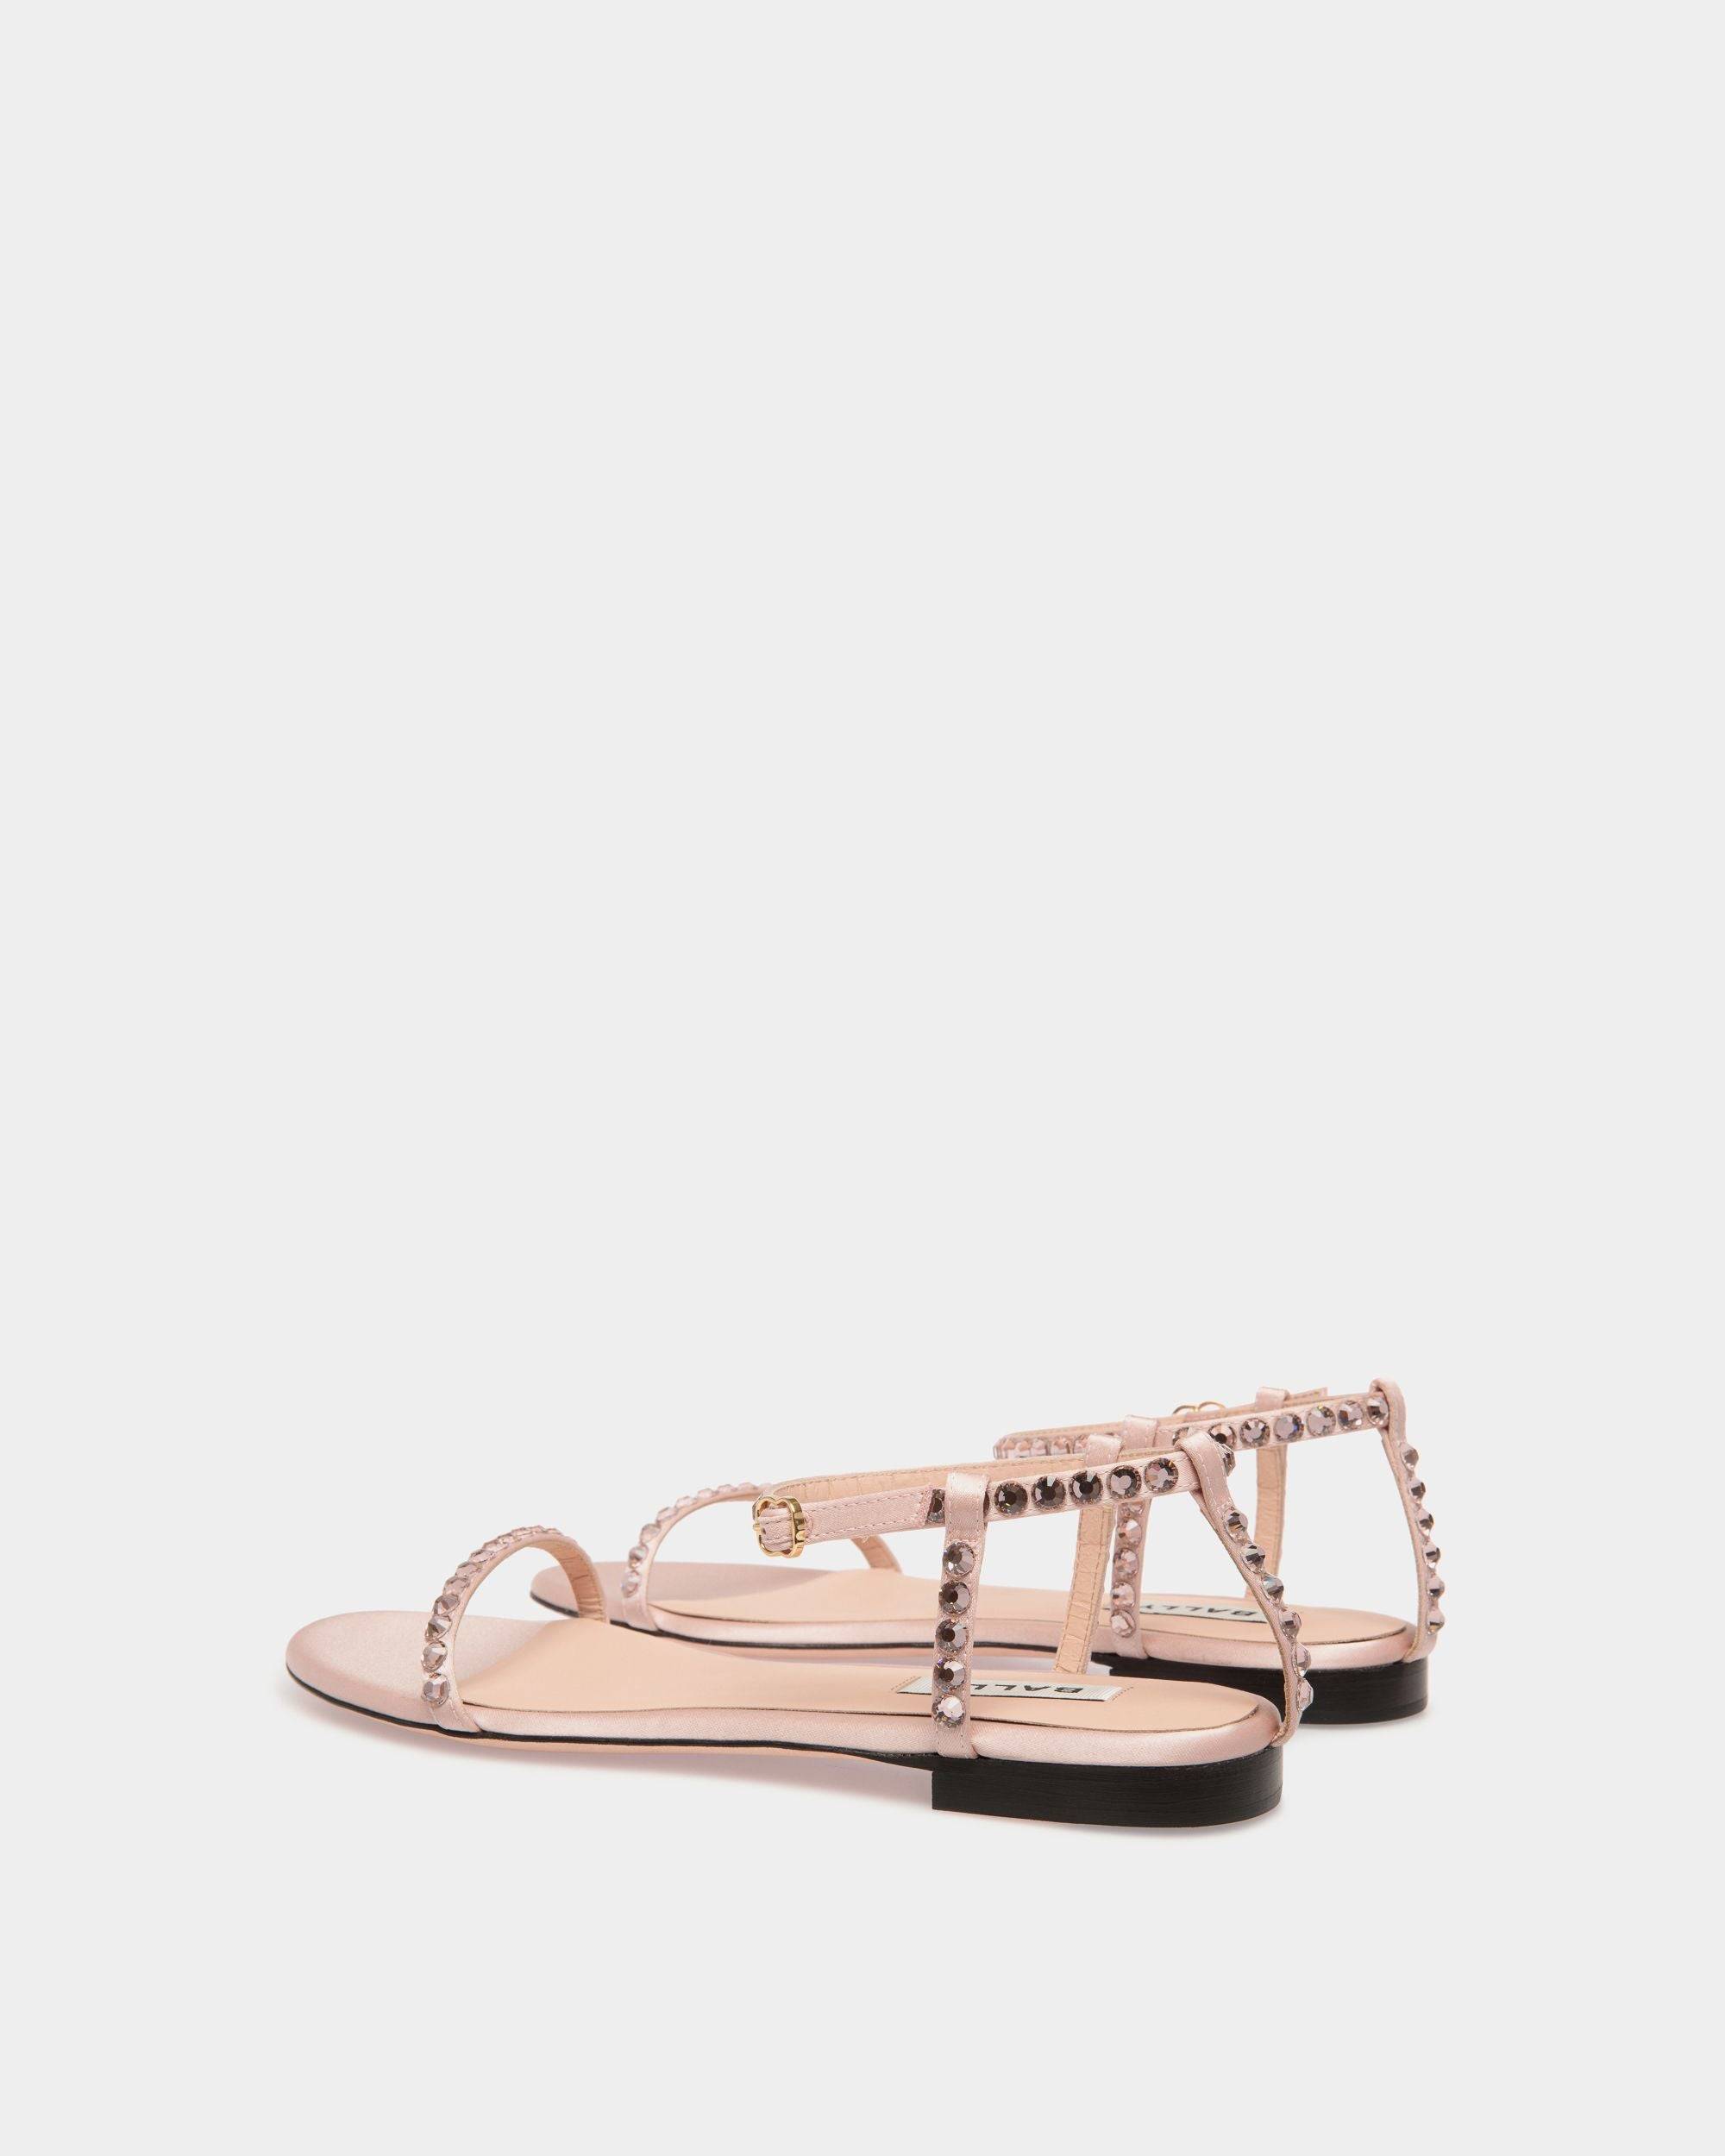 Katy Flat Sandal in Light Pink Fabric with Crystals - Women's - Bally - 03